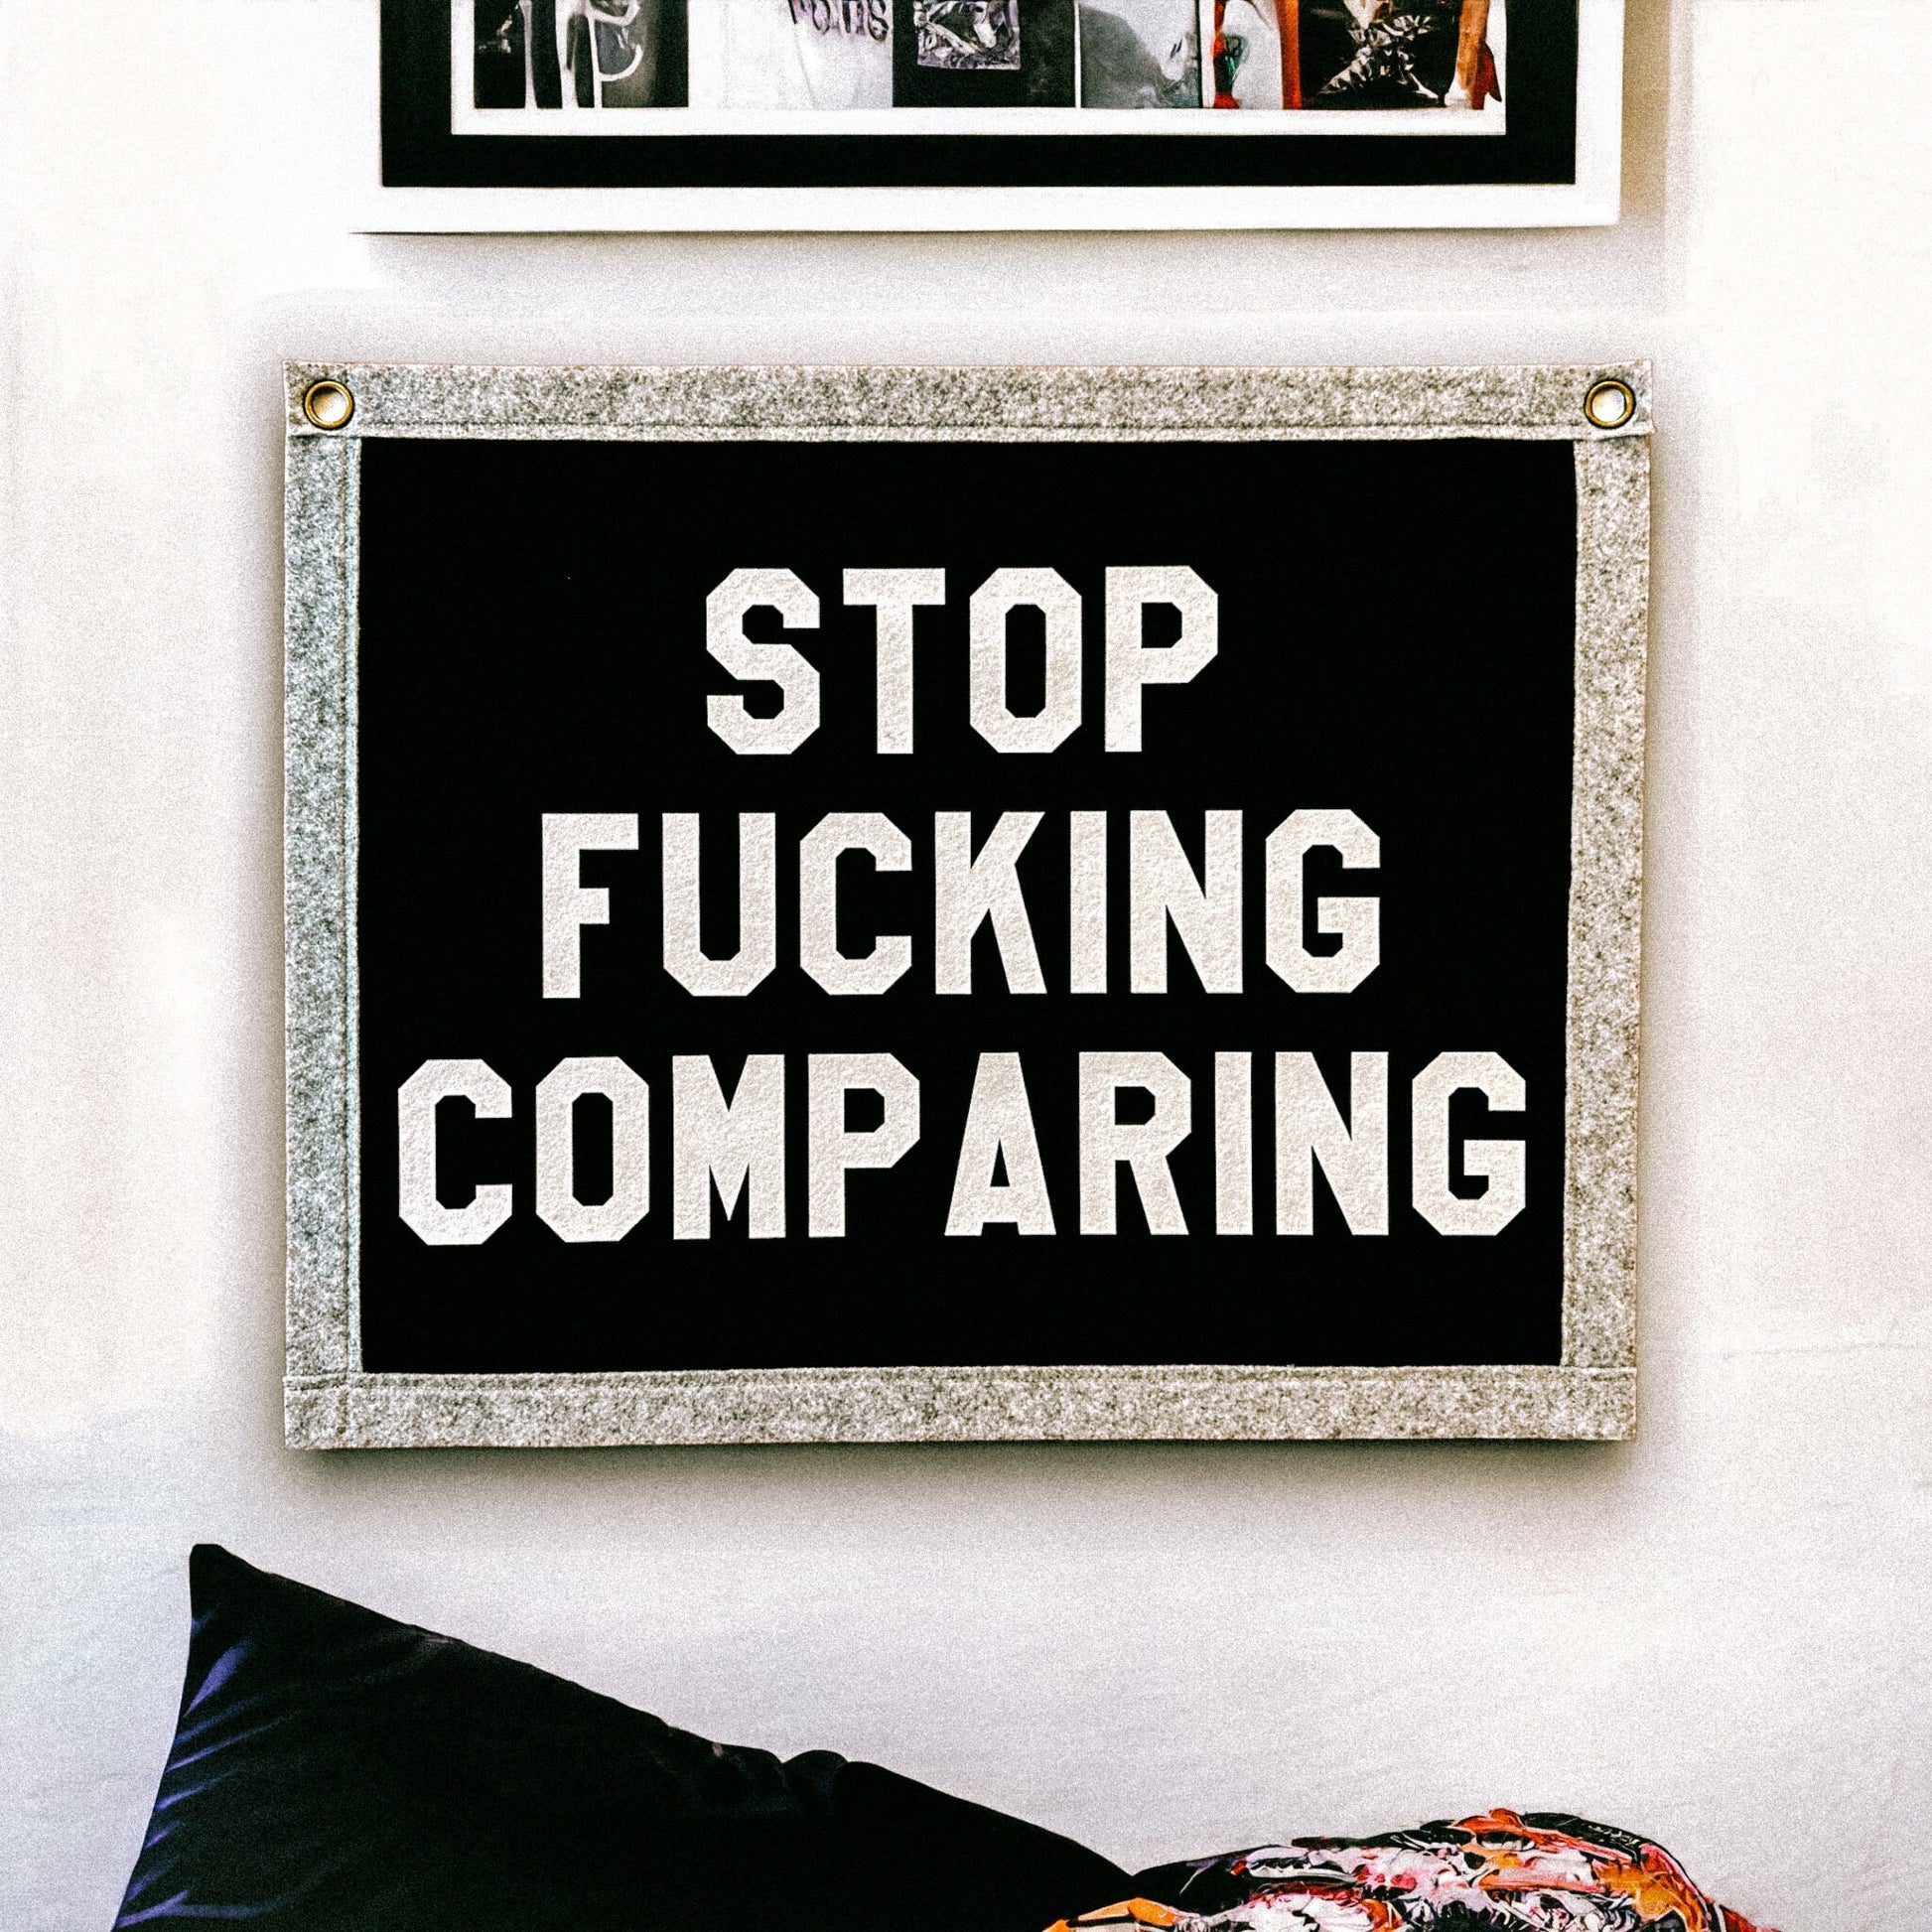 Stop Fucking Comparing Banner | 40cm x 50cm Felt Pennant Flag Banner | Vintage Banner | Wall Decor | Wall Hanging